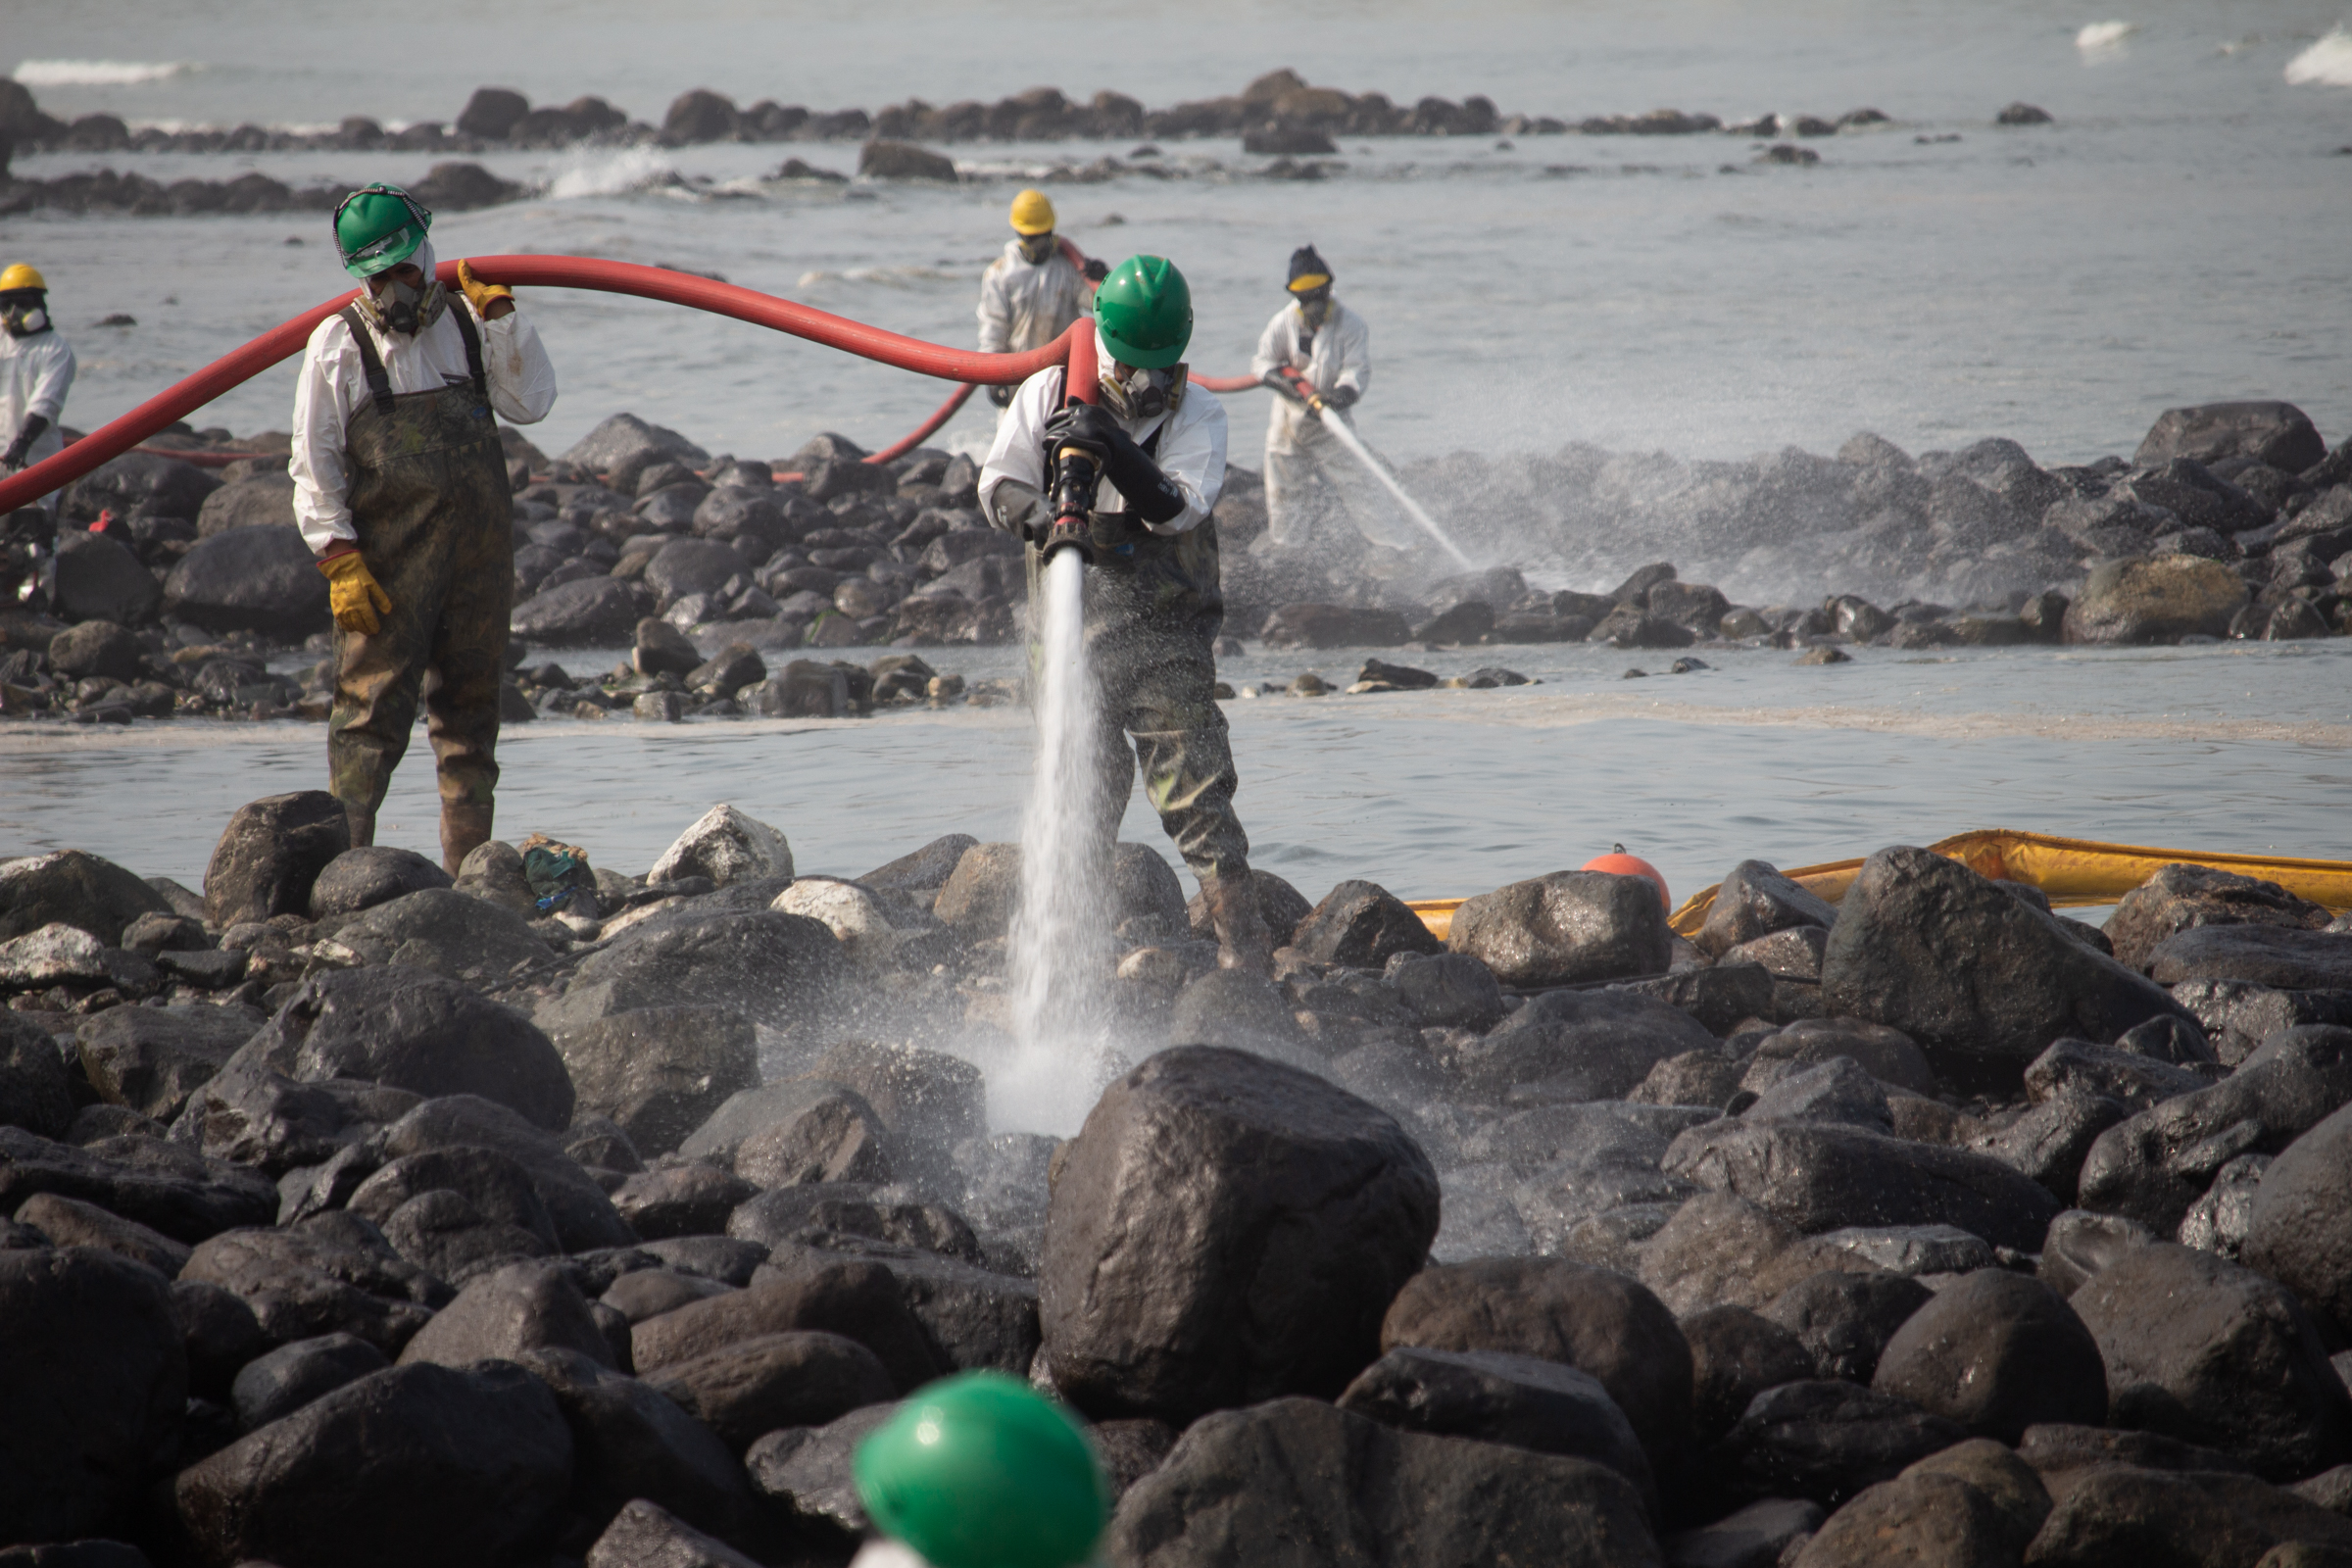 People spraying water from hoses to wash off crude oil